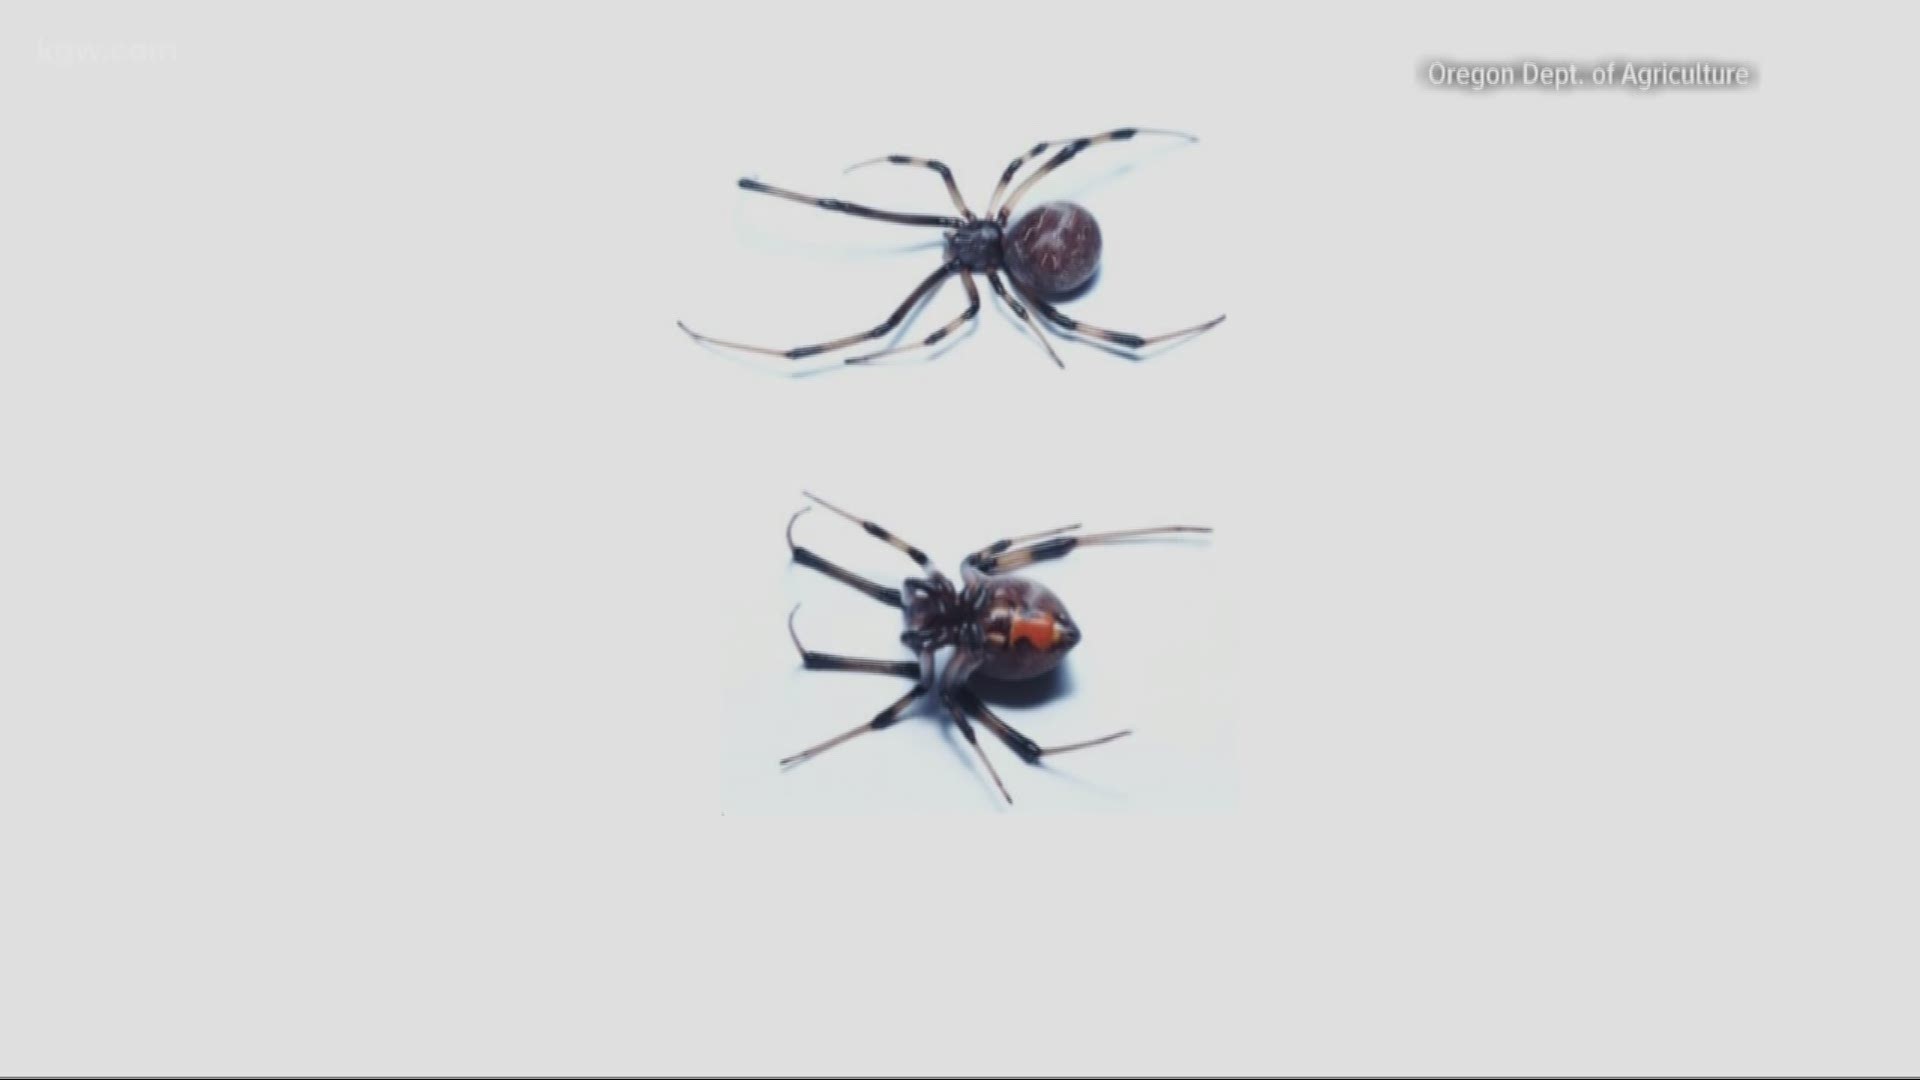 The Brown Widow spider has been spotted in Oregon.